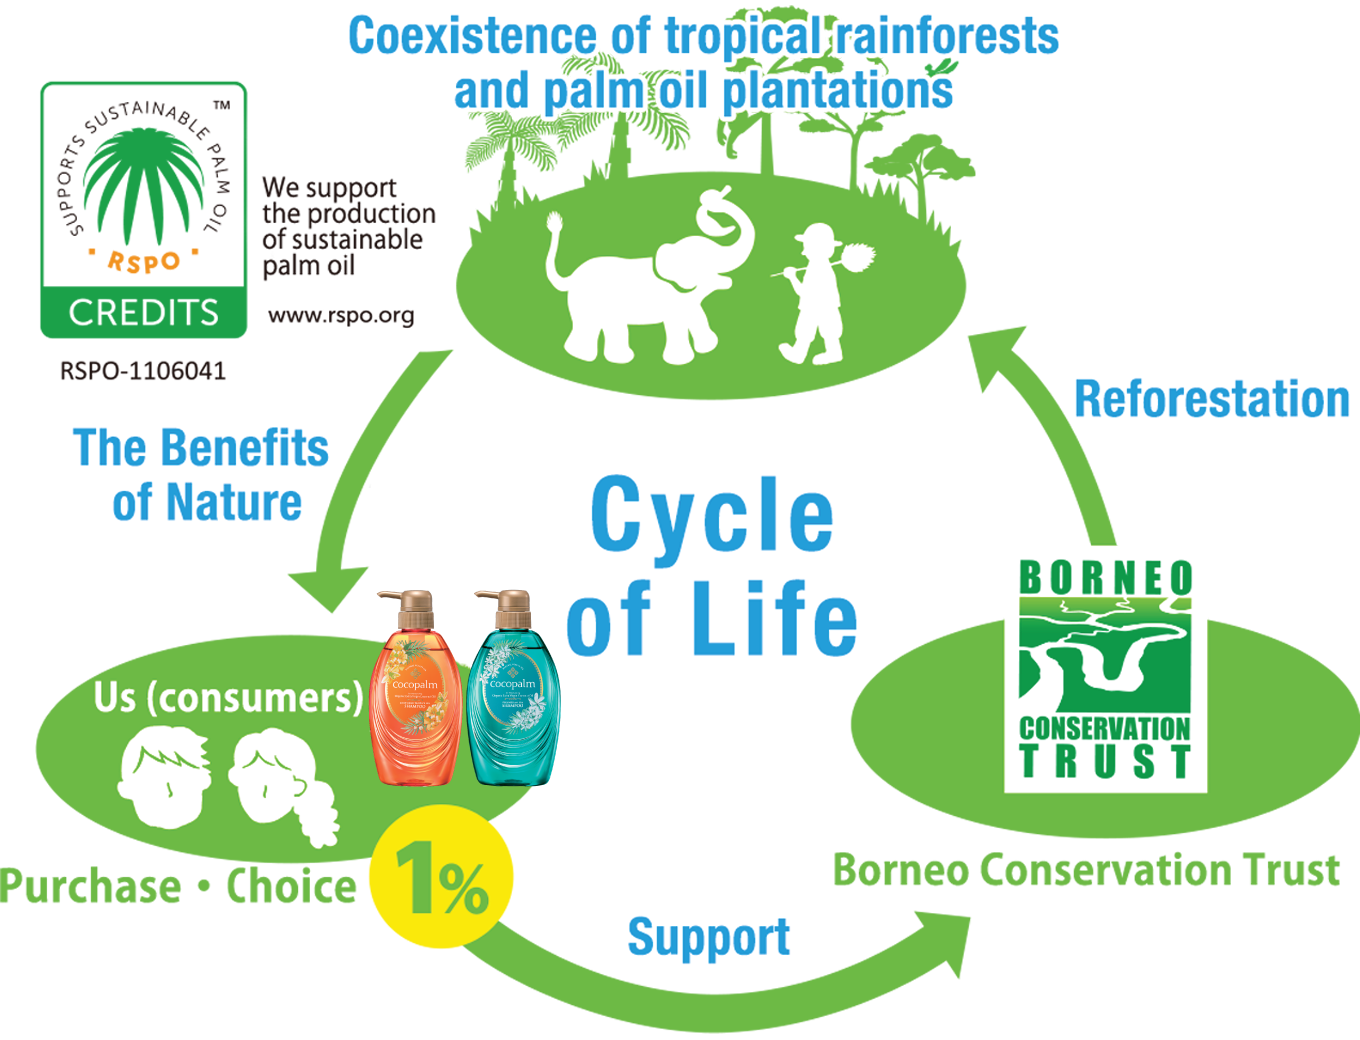 The circle of life that Cocopalm supports. RSPO credits and donations to the Borneo Conservation Trust help protect nature.